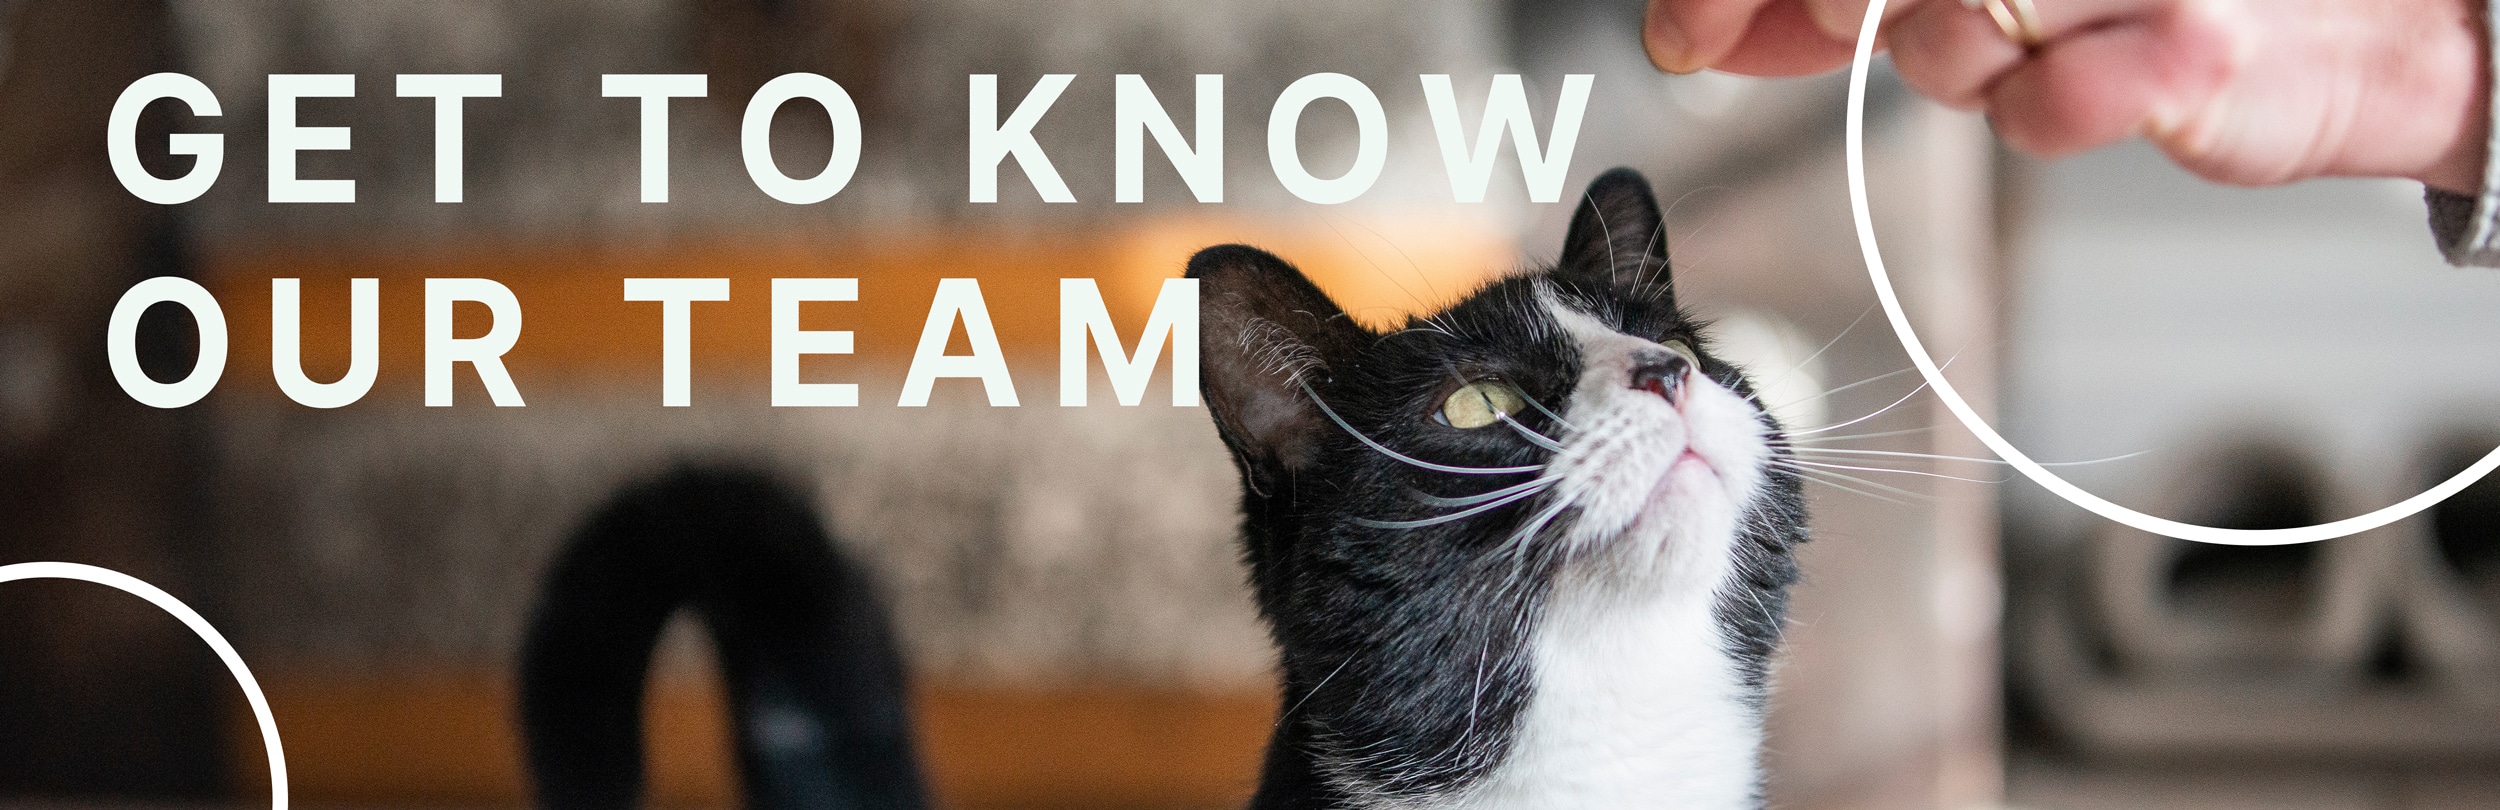 get to know our team graphic with a cat